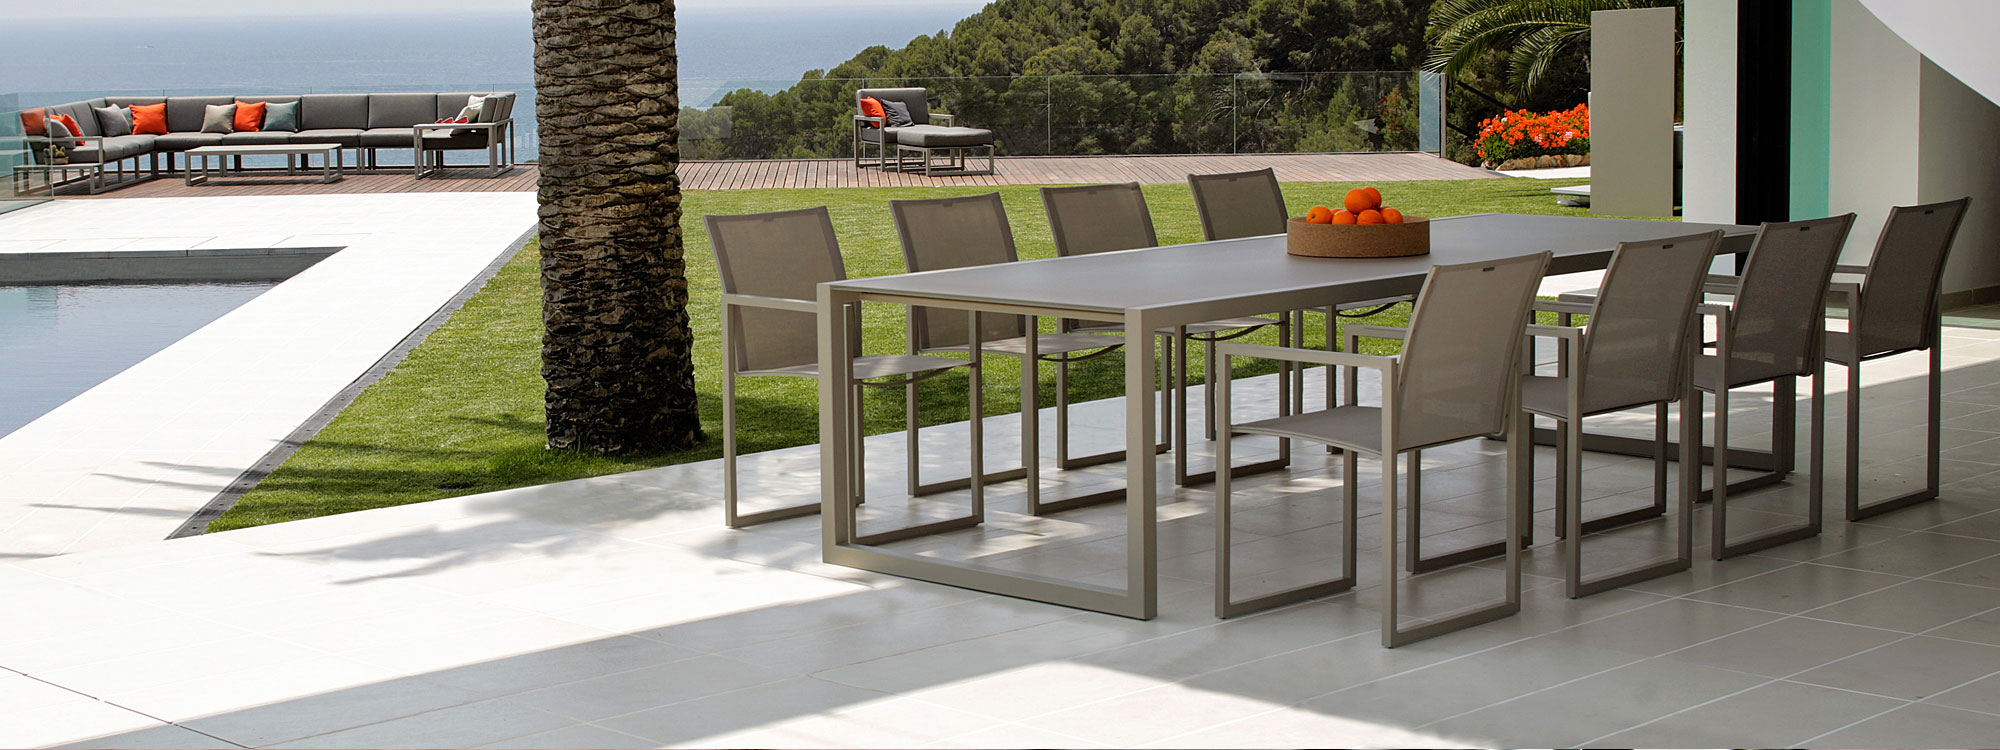 Photo of neutral minimalist garden dining table and chairs